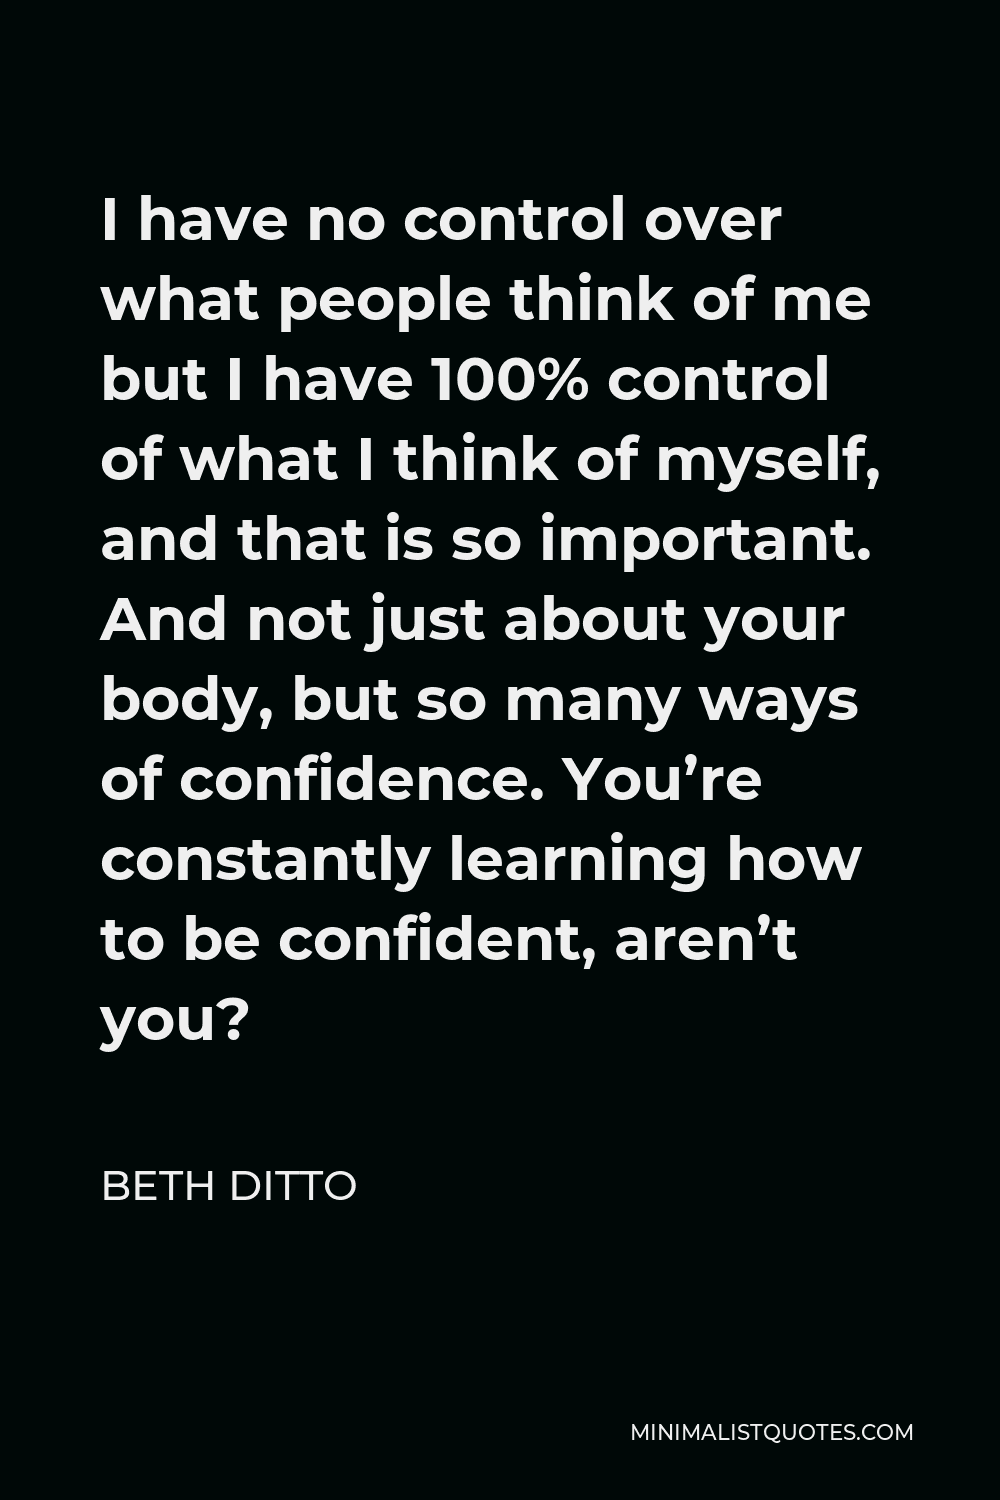 Beth Ditto Quote - I have no control over what people think of me but I have 100% control of what I think of myself.